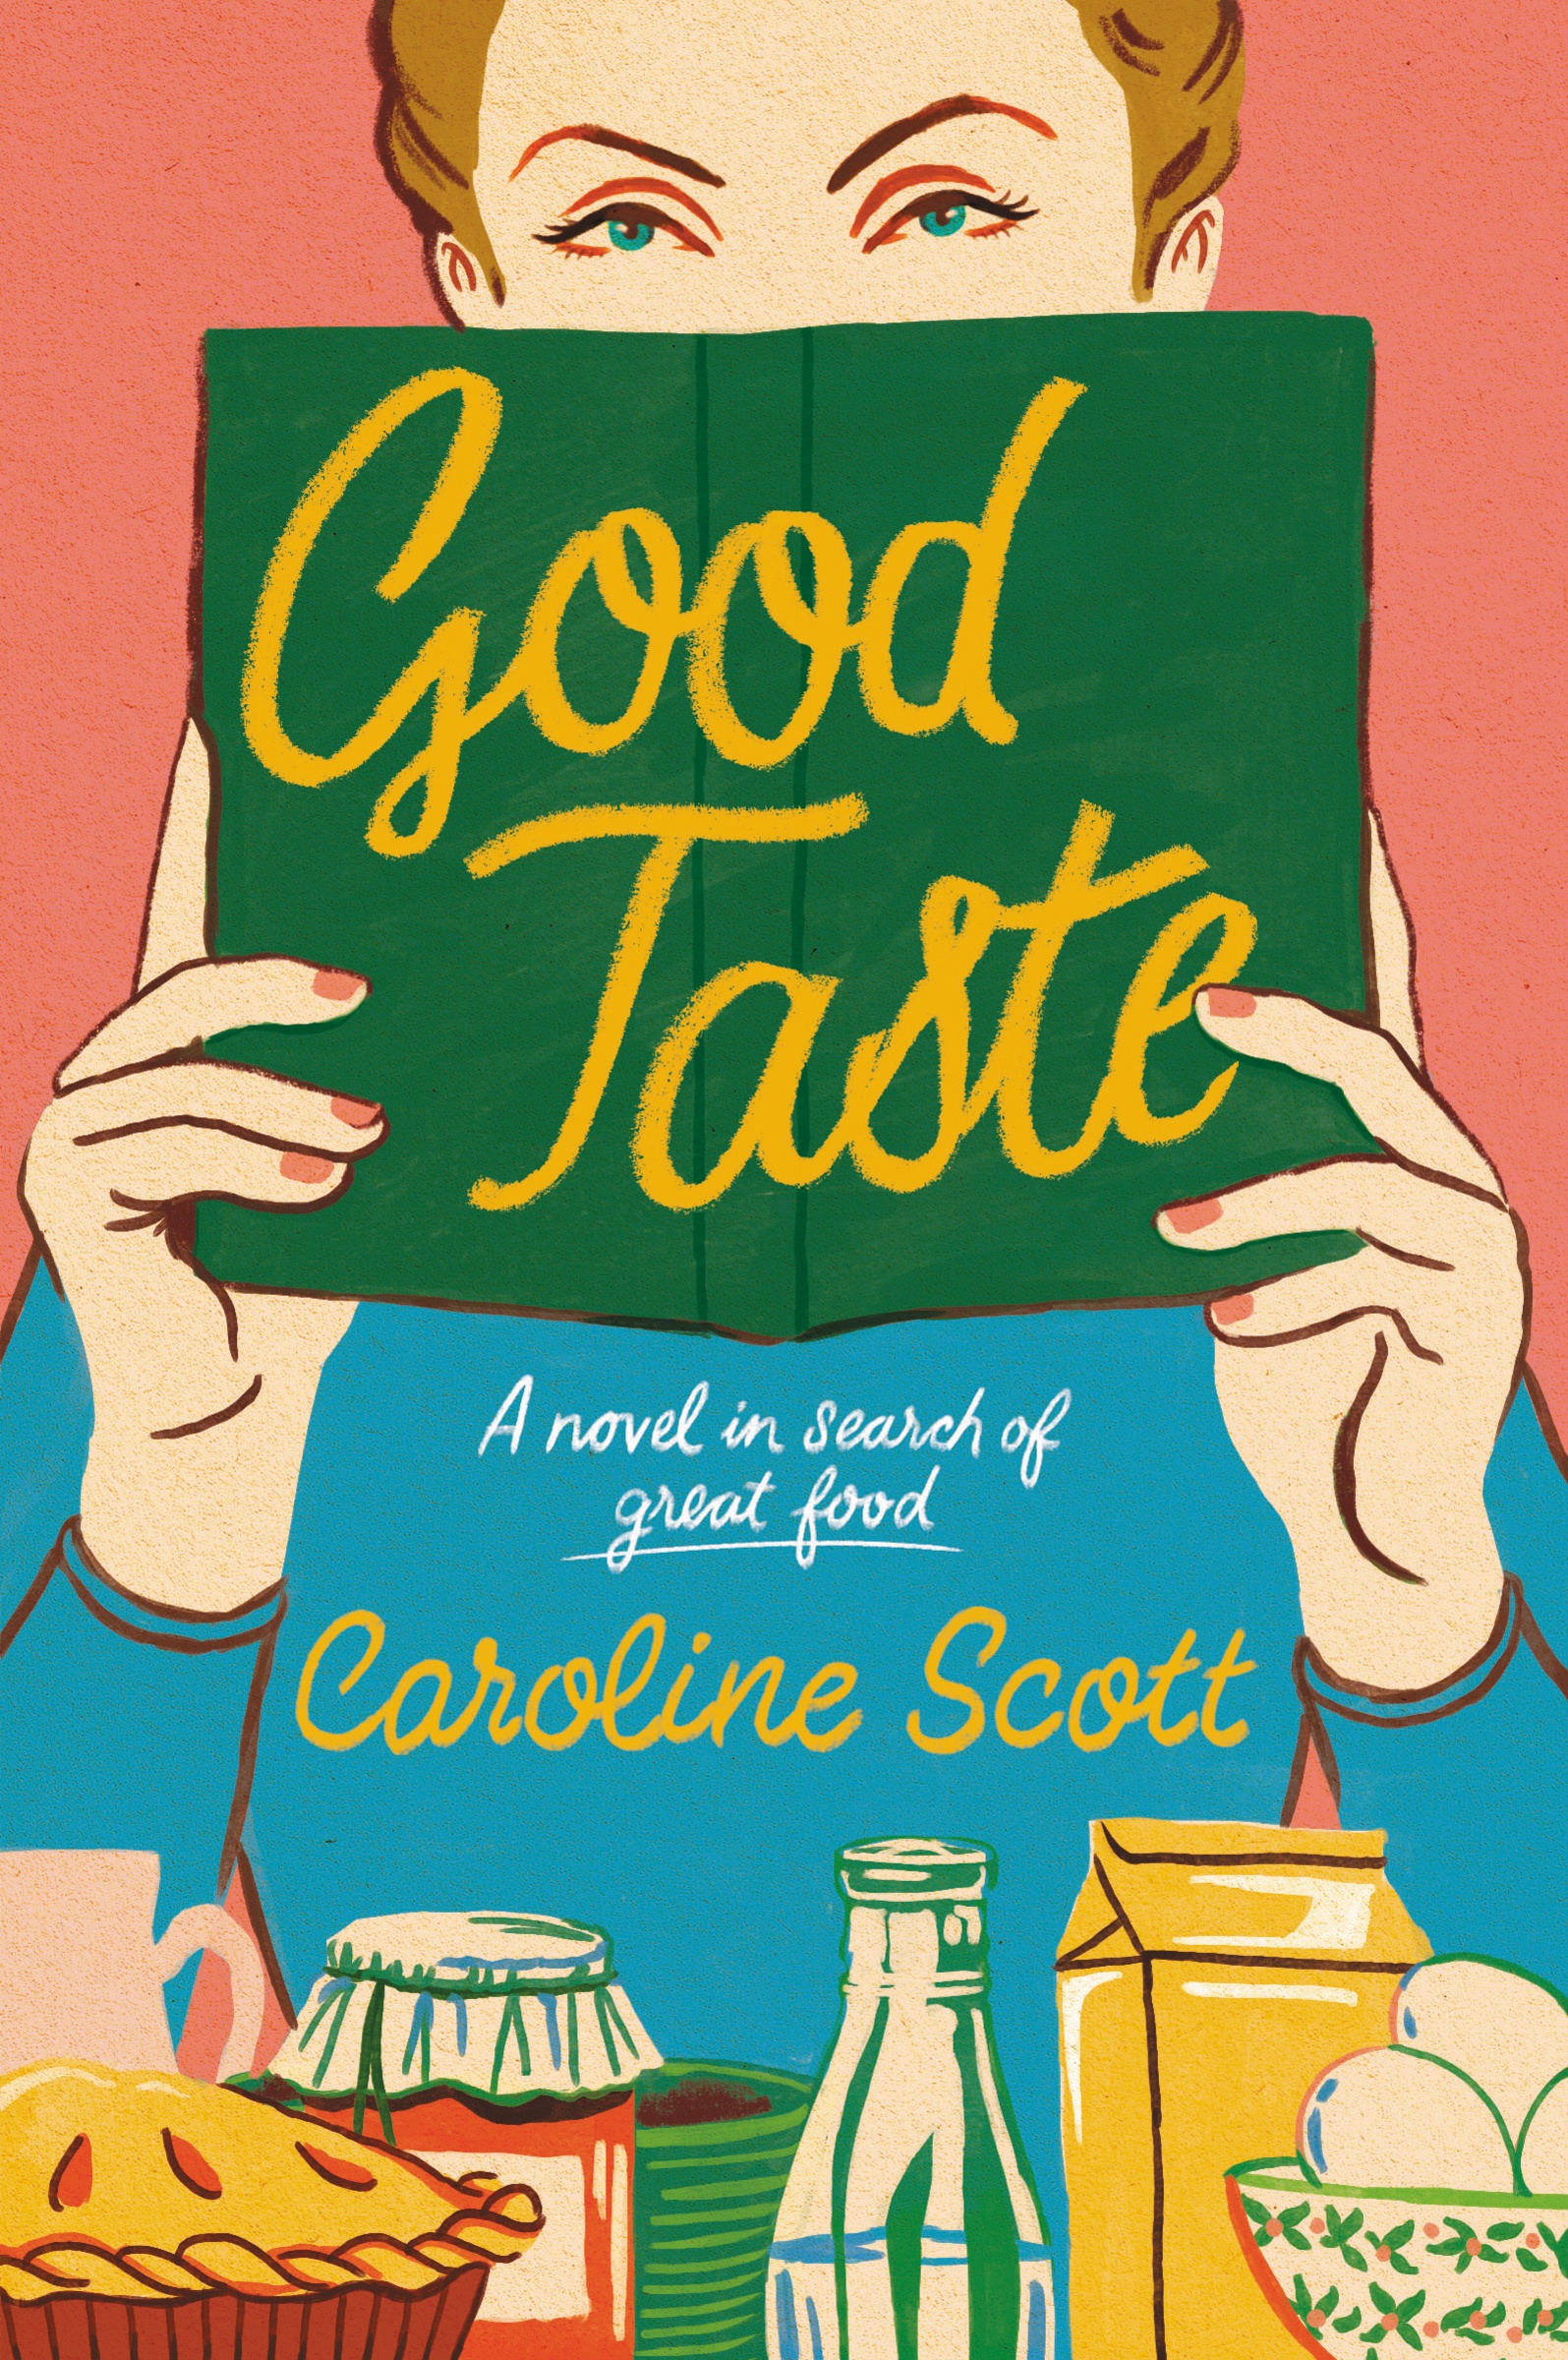 Good Taste A Novel in Search of Great Food cover image